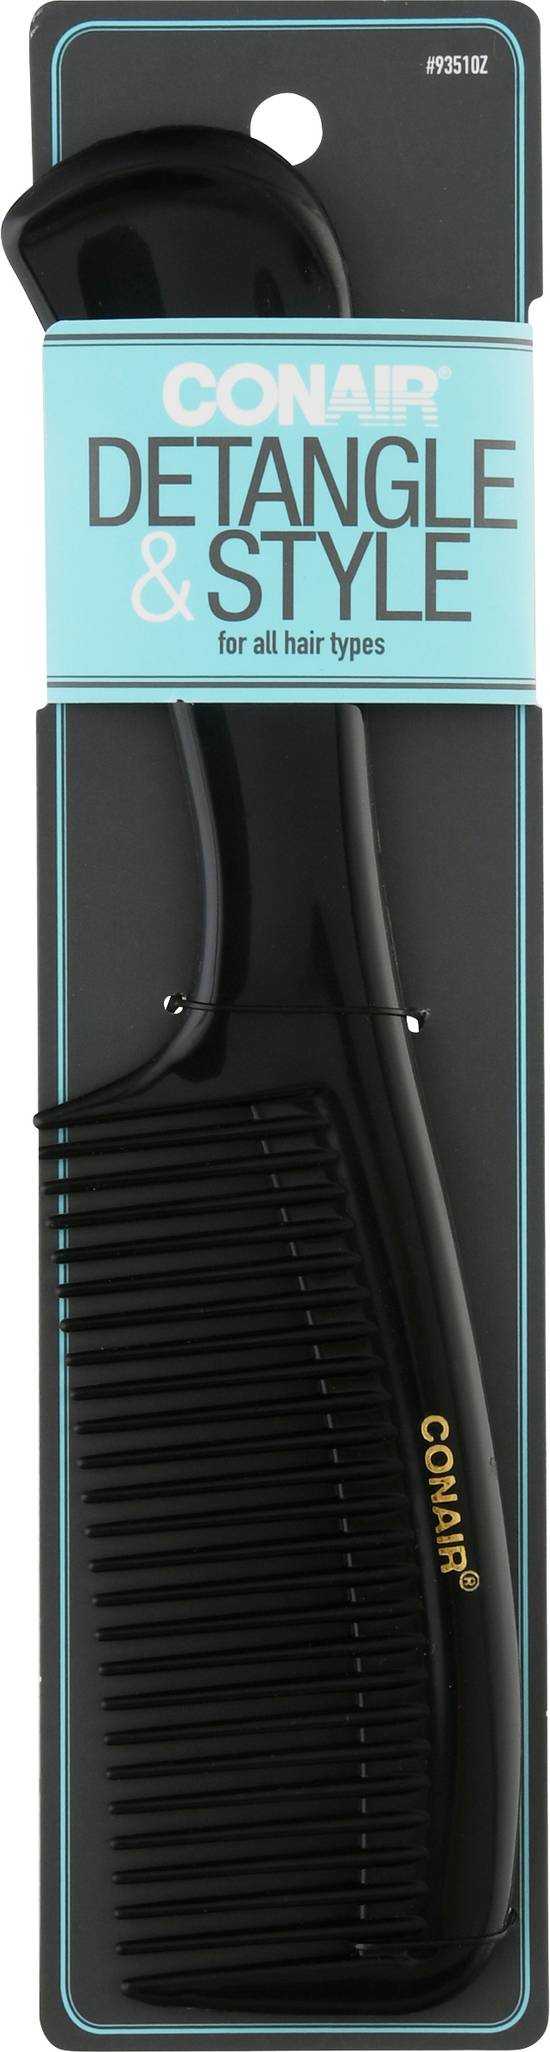 Conair Detangle and Style Comb (1 ct)